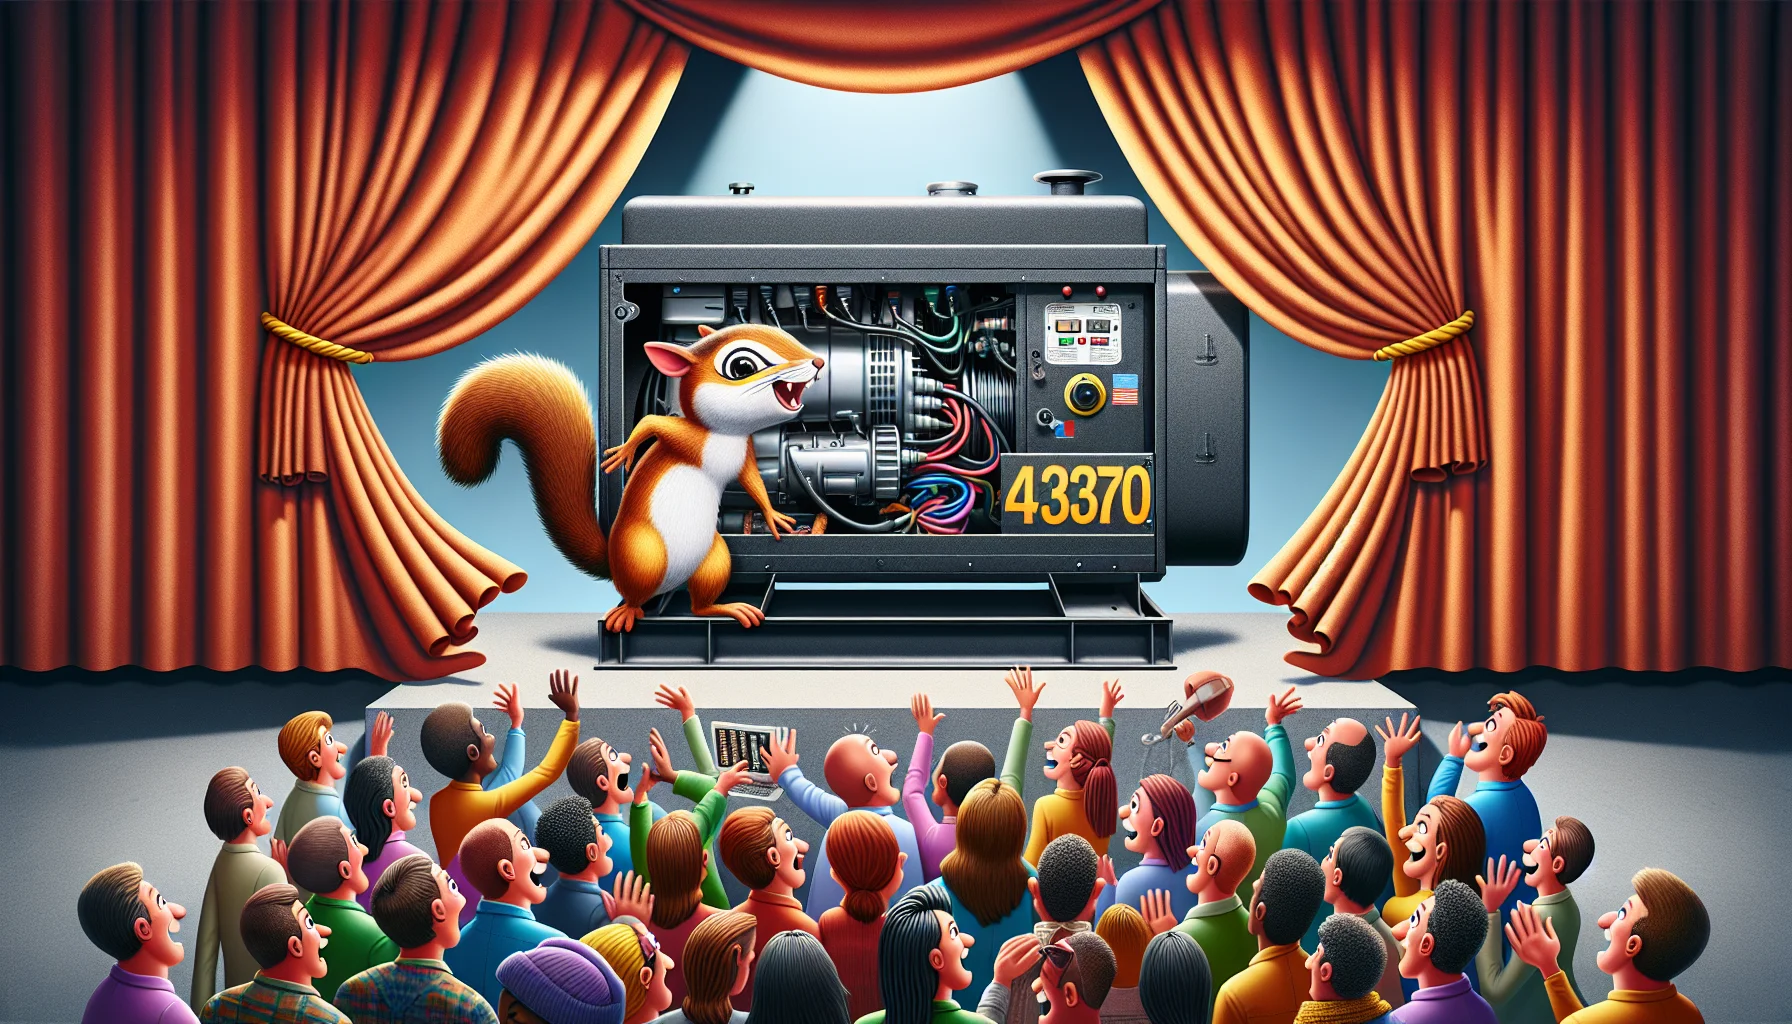 A humorous scene featuring a nondescript power generator revealed by a large curtain held by an animated squirrel. The generator is placed on a pedestal, proudly shimmering under a perfectly positioned spotlight. It proudly displays the number 4375 painted in bold colors. A cheering crowd of diverse people expresses their astonishment and fascination. Include people of mixed genders and different descents like Caucasian, African, Asian, Hispanic, and Middle-Eastern. They all gaze at the generator, some with jaws dropped, others nudging their companions in disbelief. To enhance the humor, some people are holding household appliances to plug in, like an oversized blender, a lamp, or a hairdryer.